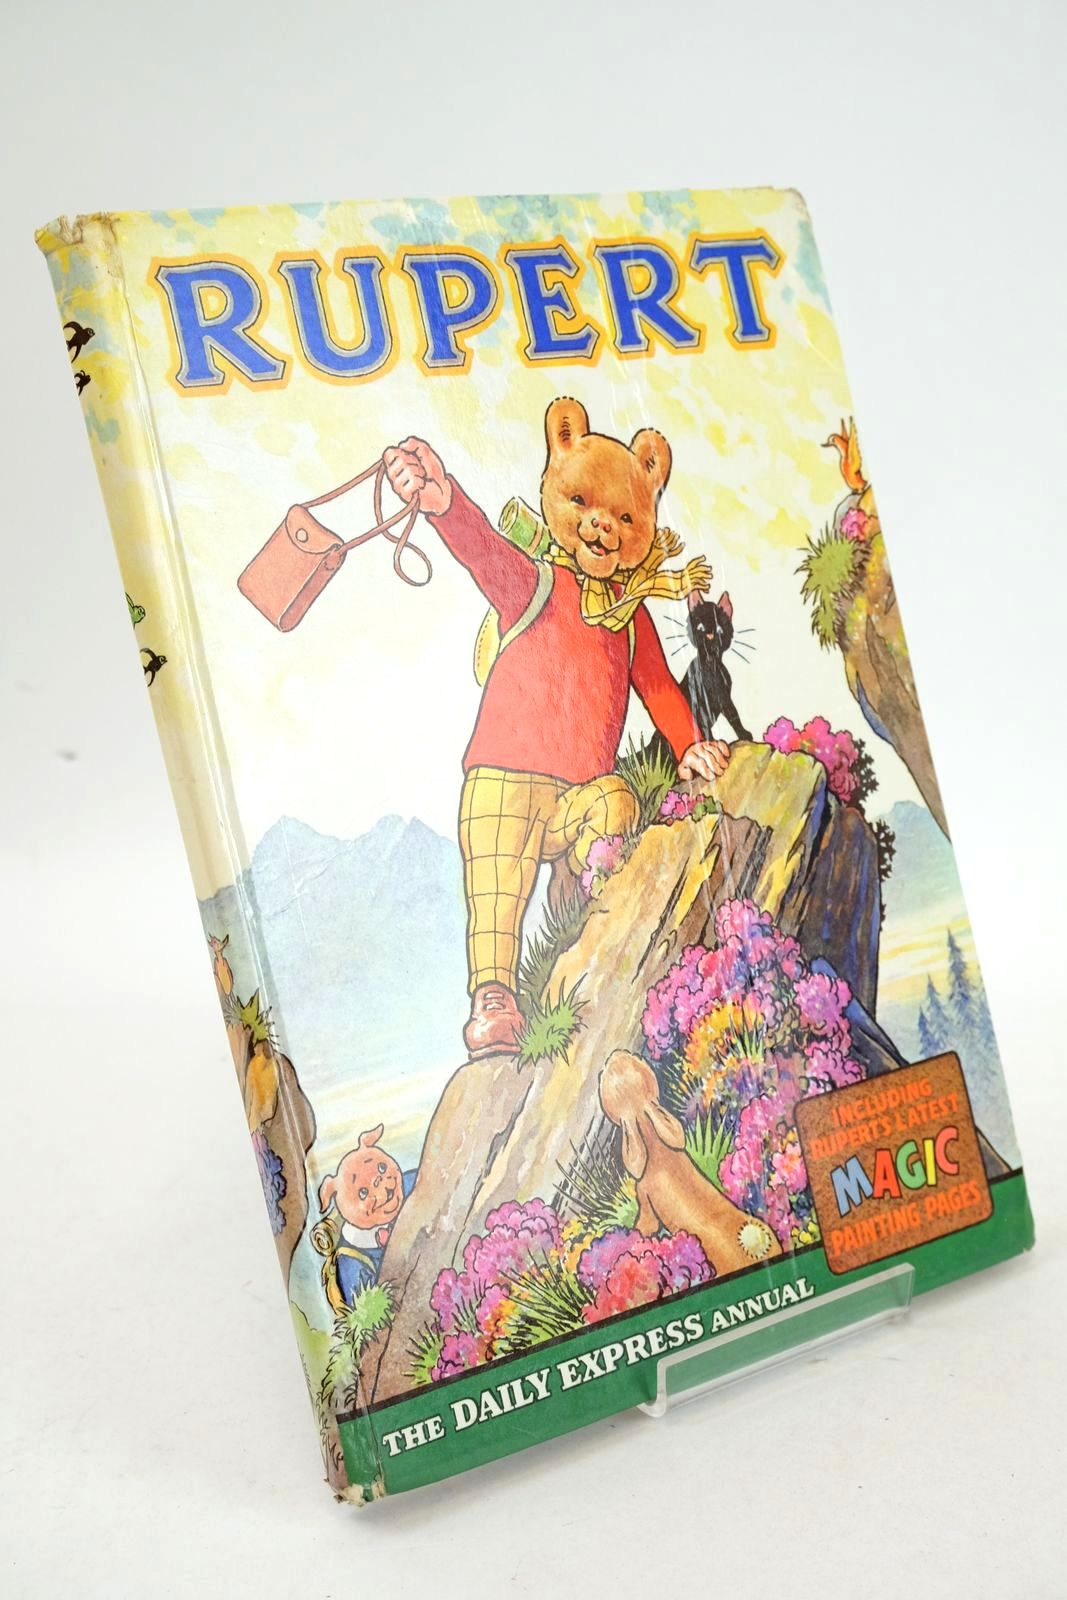 Photo of RUPERT ANNUAL 1964 written by Bestall, Alfred illustrated by Bestall, Alfred published by Daily Express (STOCK CODE: 1325828)  for sale by Stella & Rose's Books